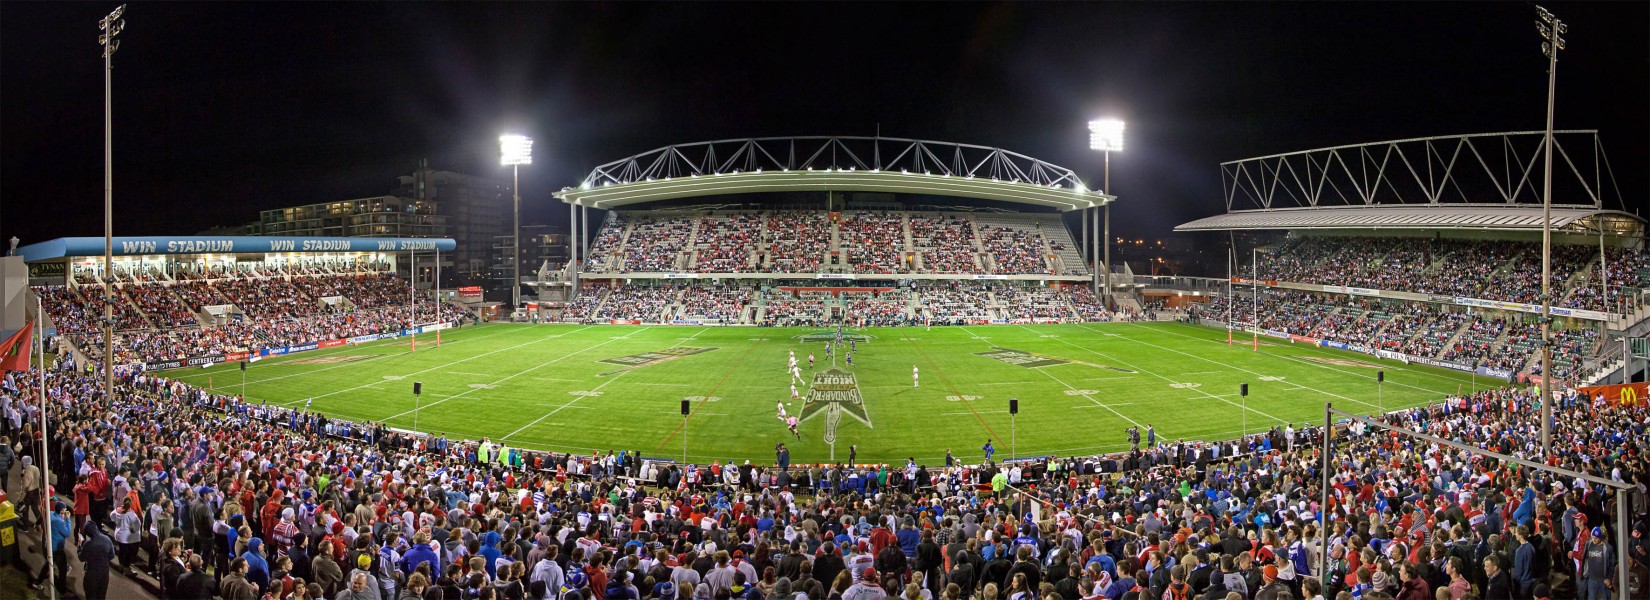 NRL hit by declining broadcast viewing figures